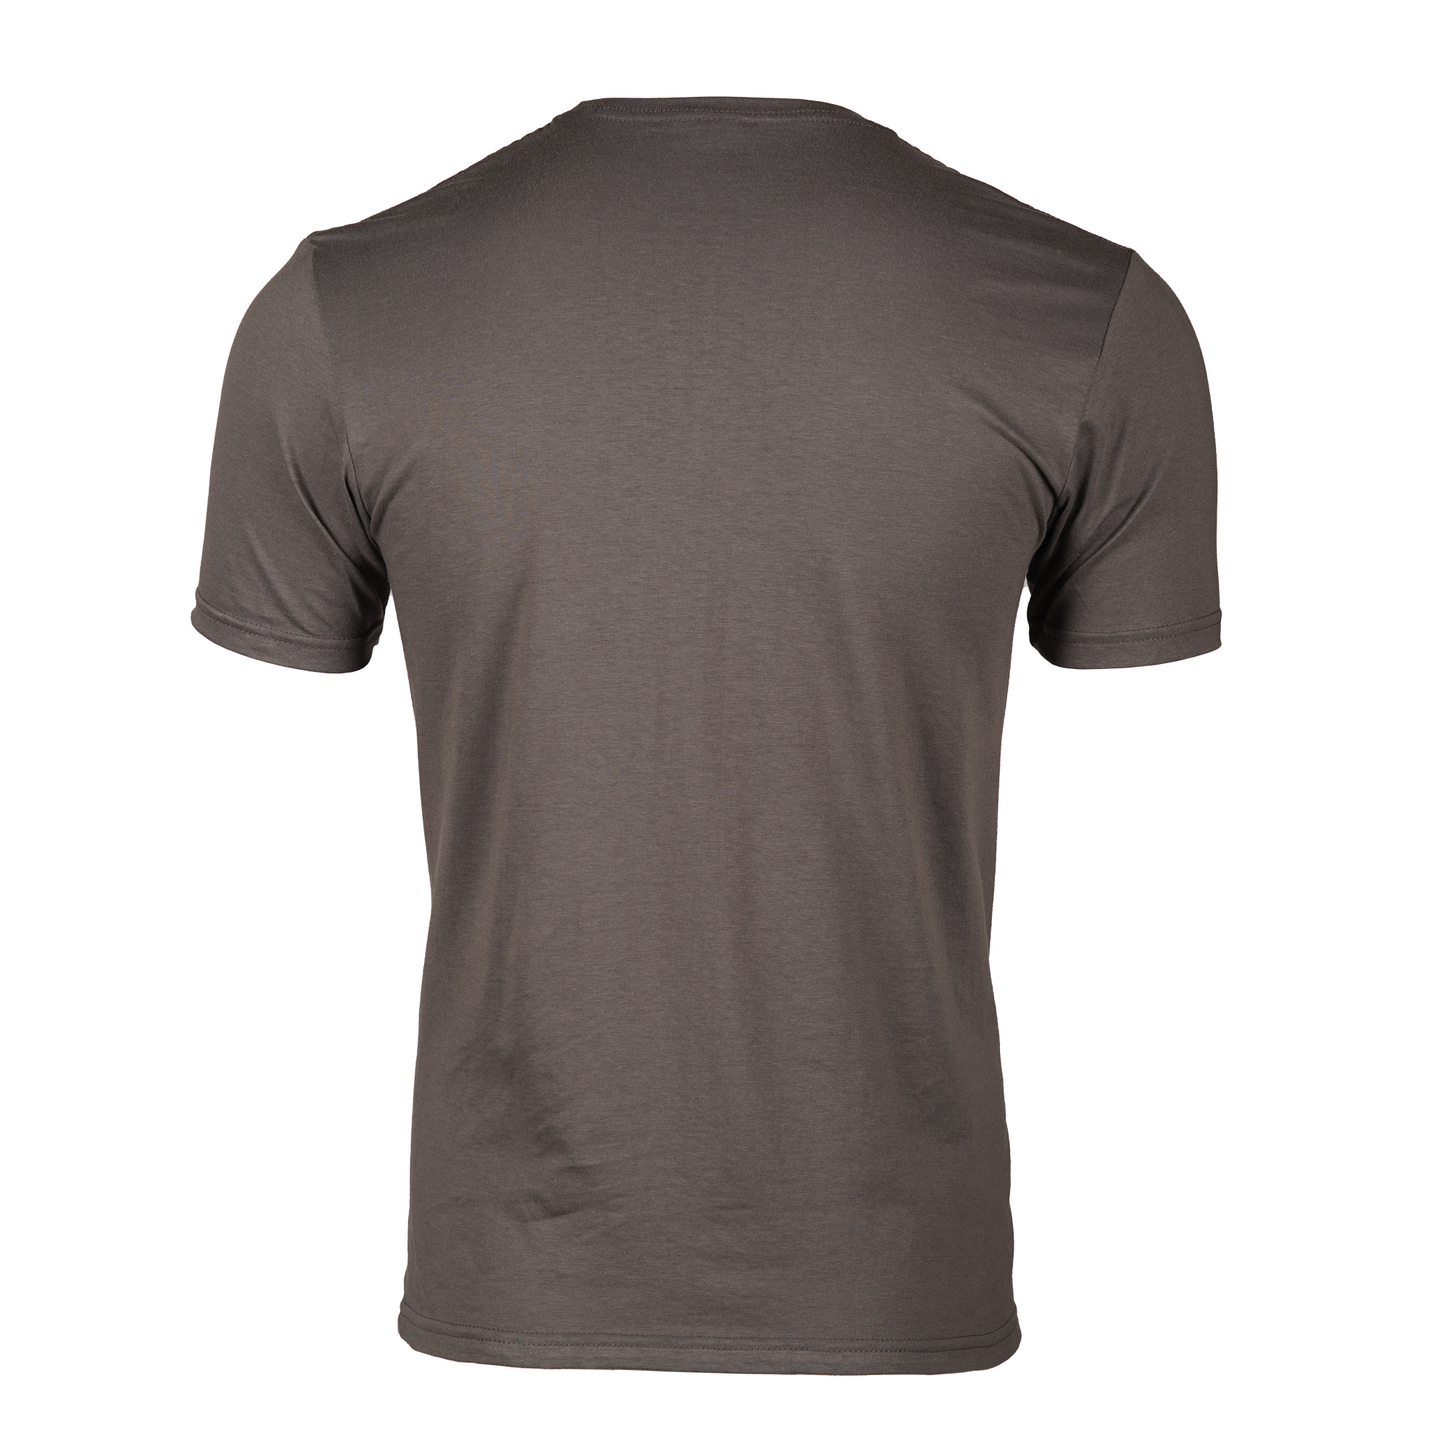 Adult Gold Crest Charcoal Tee